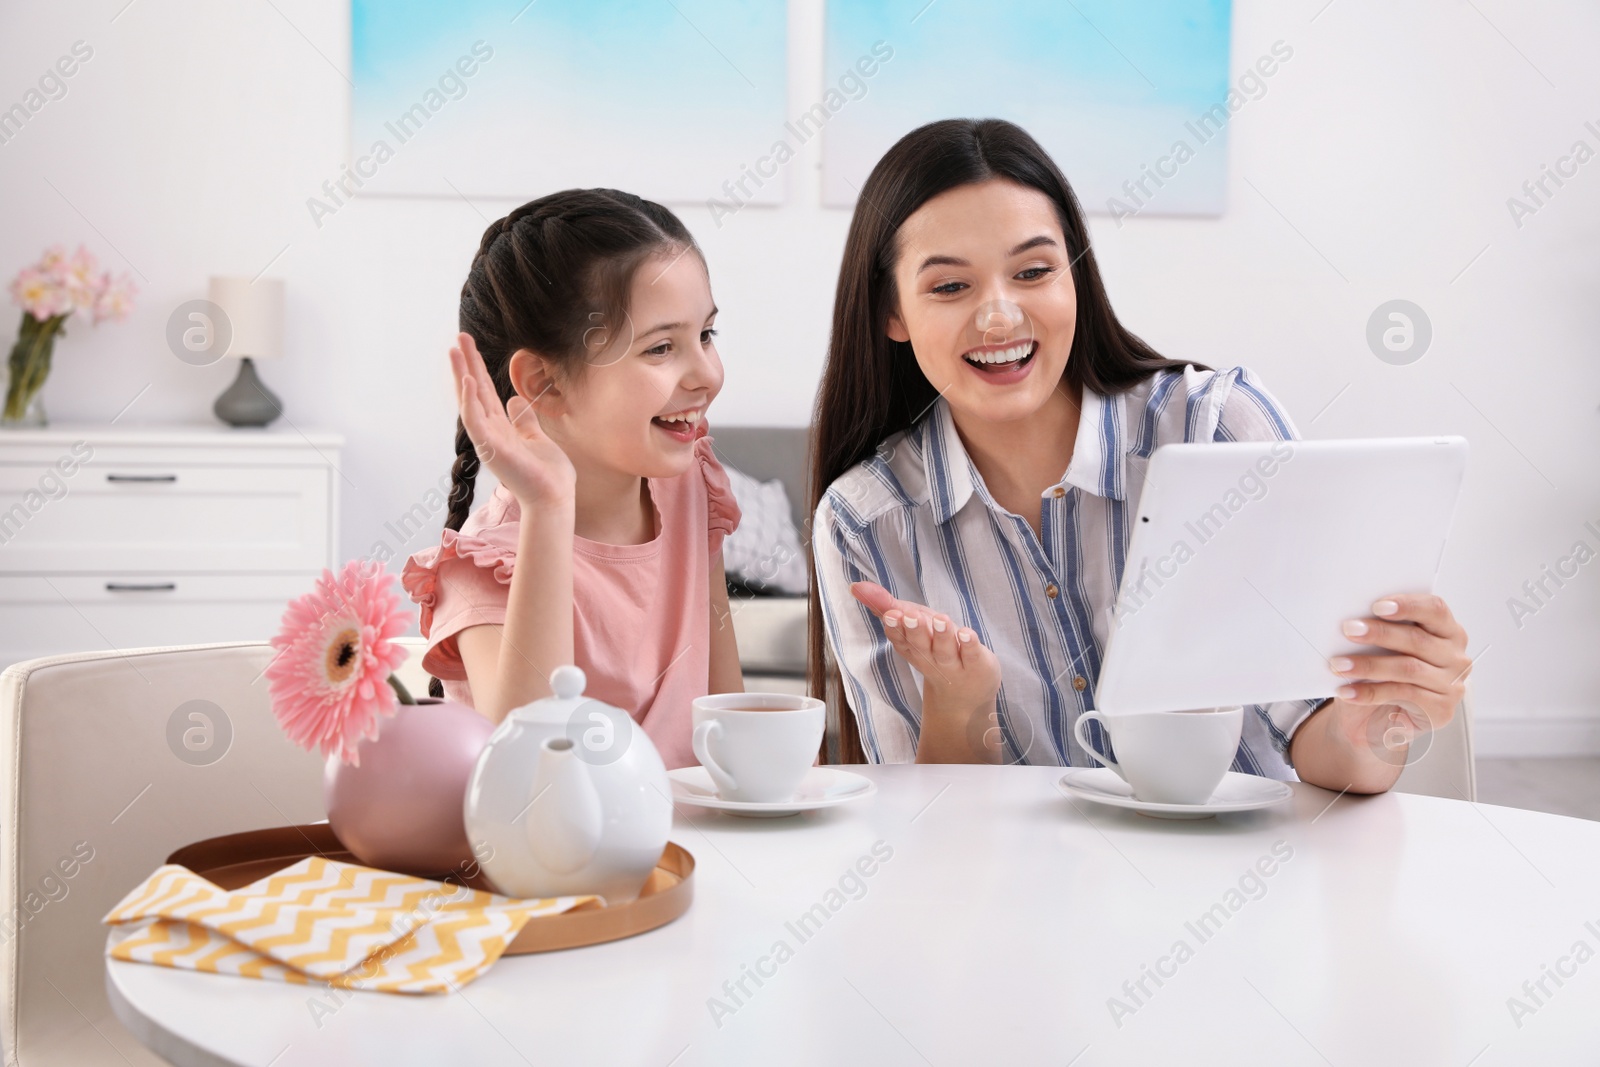 Photo of Mother and daughter using video chat on tablet at table indoors